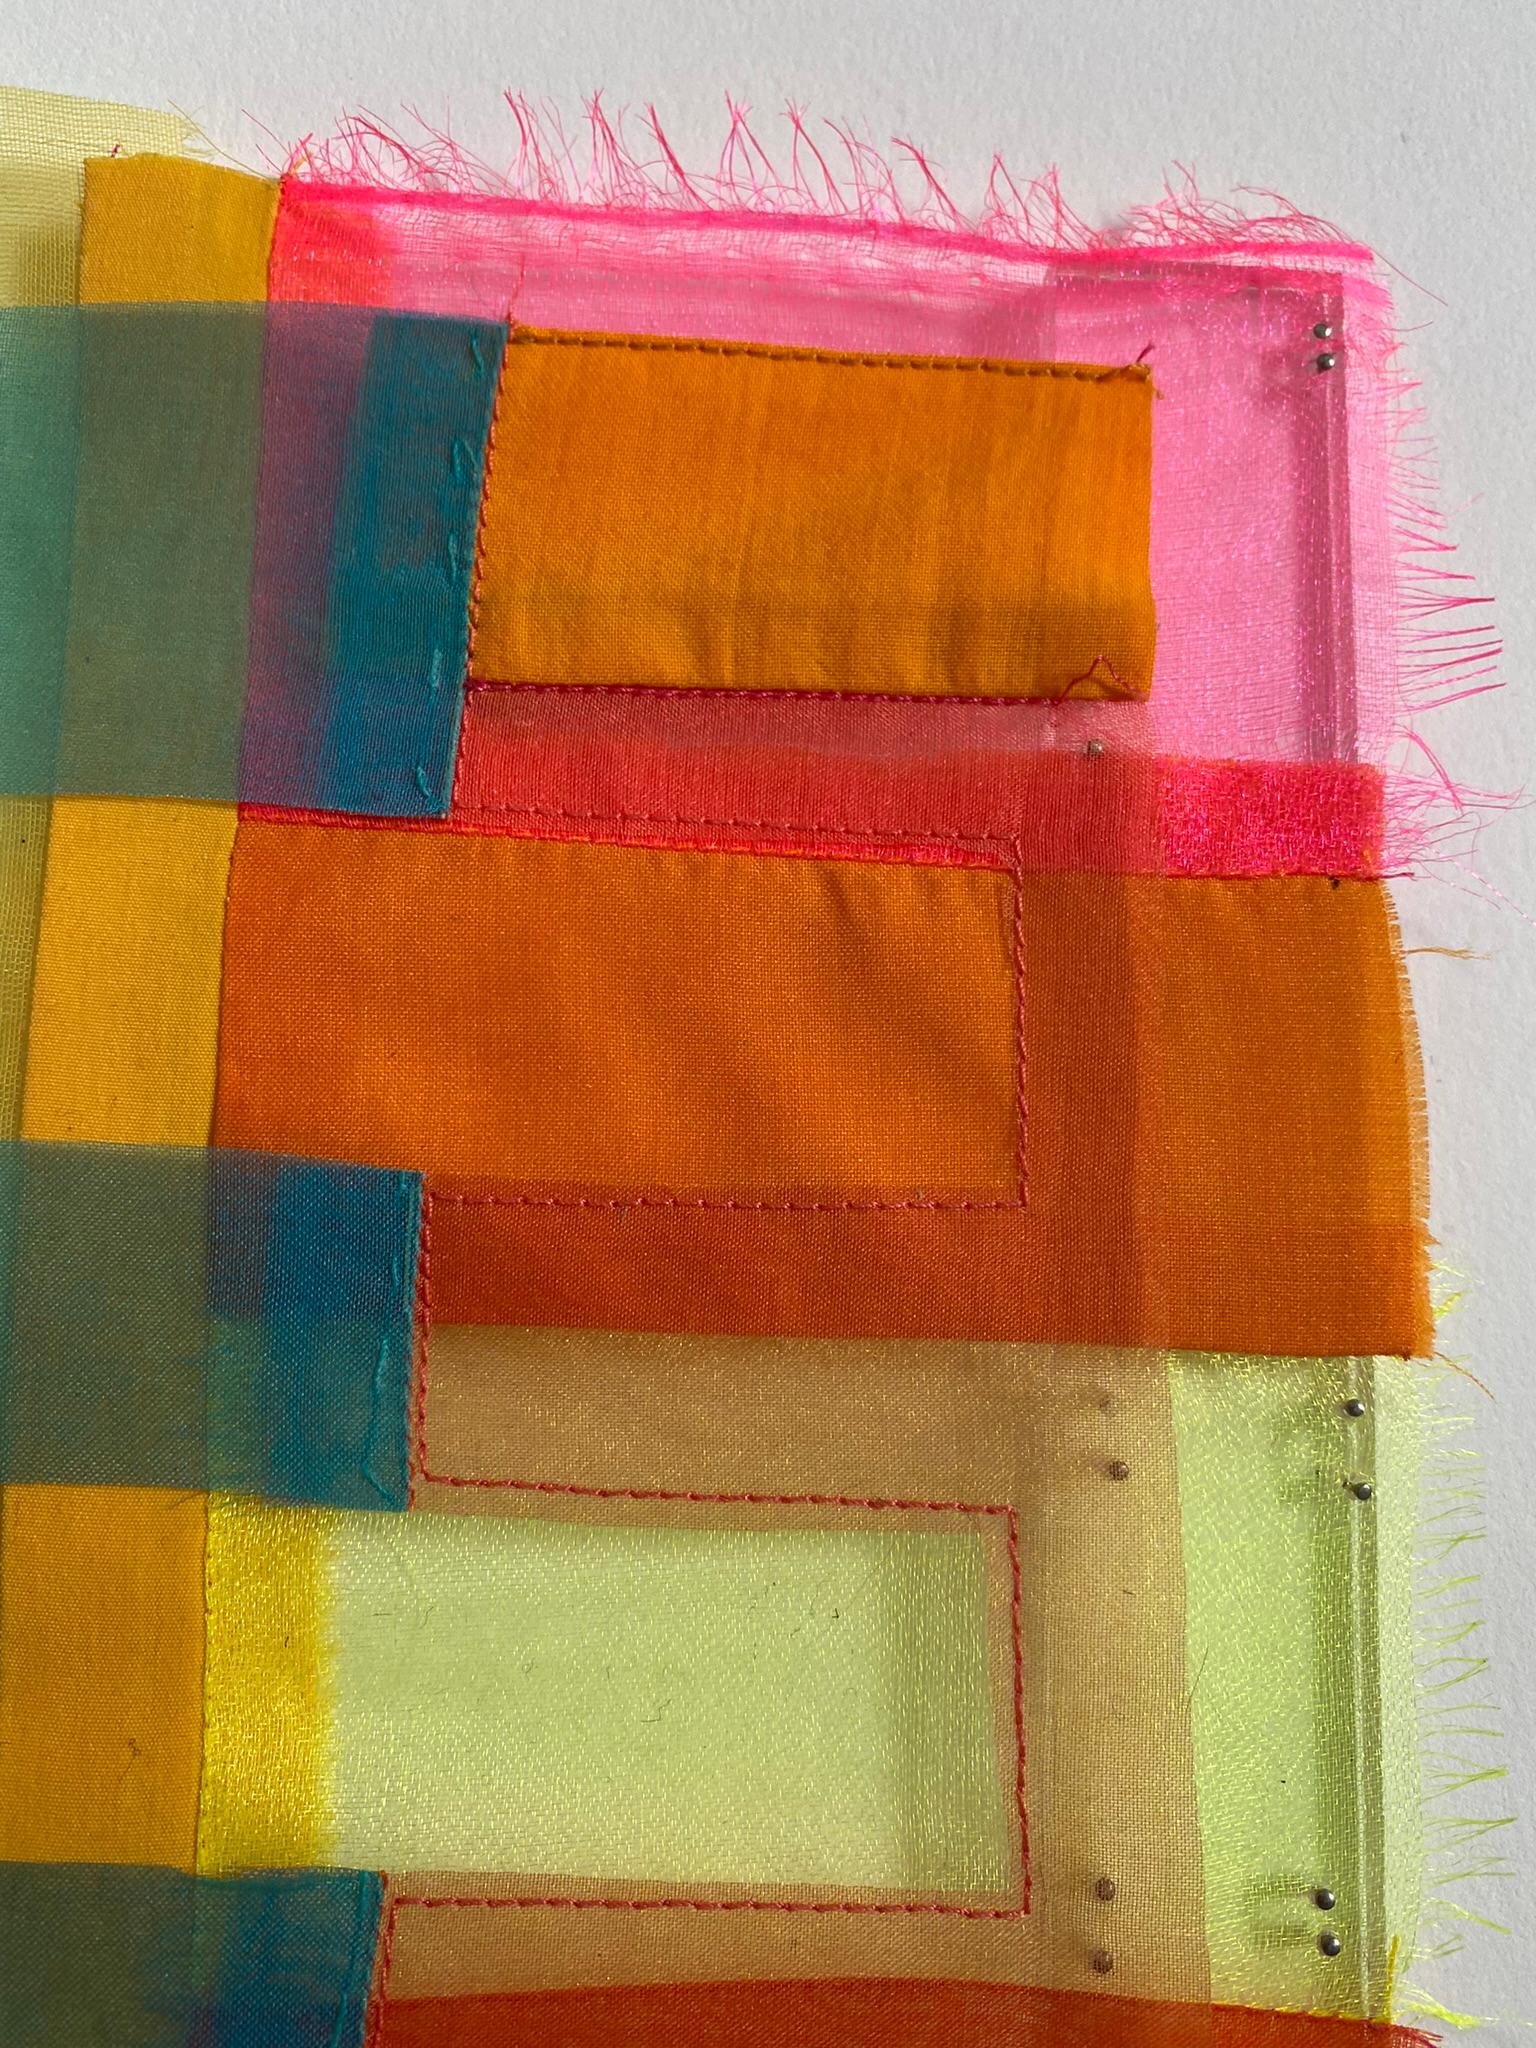 Untitled (0383), colorful abstract fabric sculpture - Sculpture by Linda Schmidt